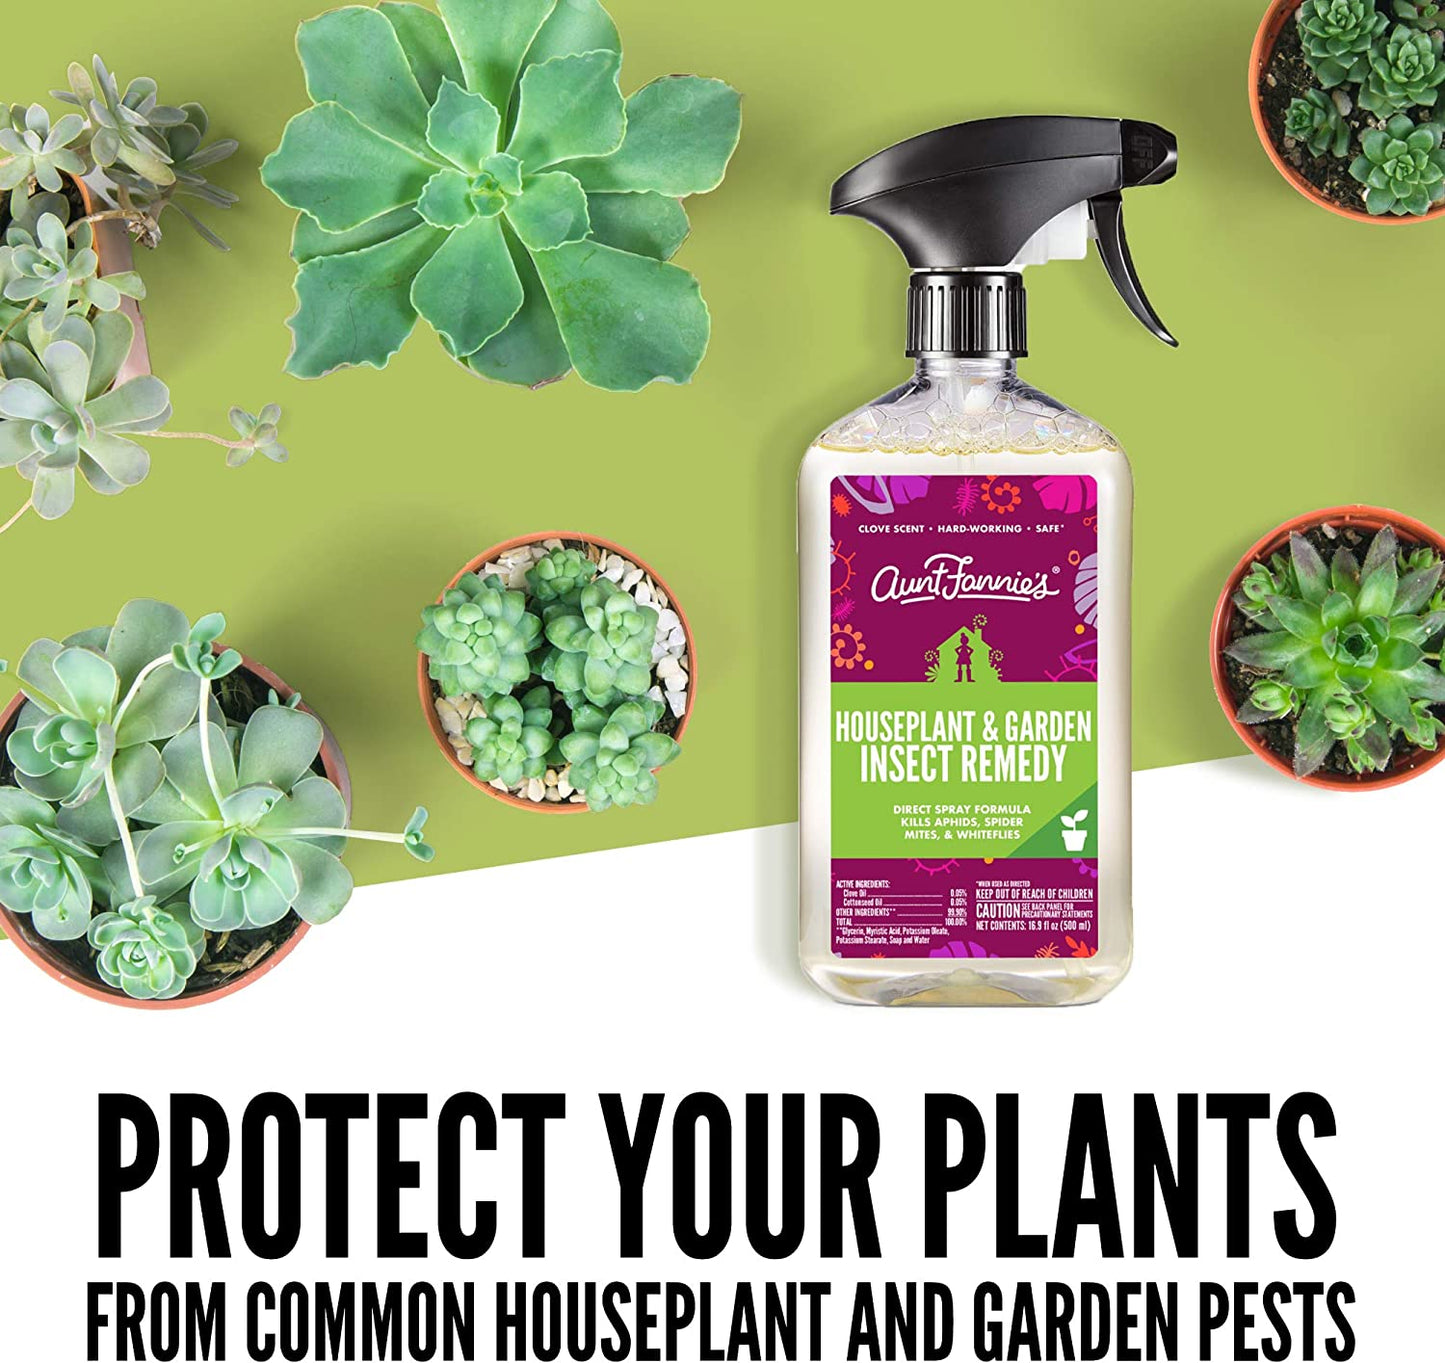 Houseplant & Garden Insect Remedy